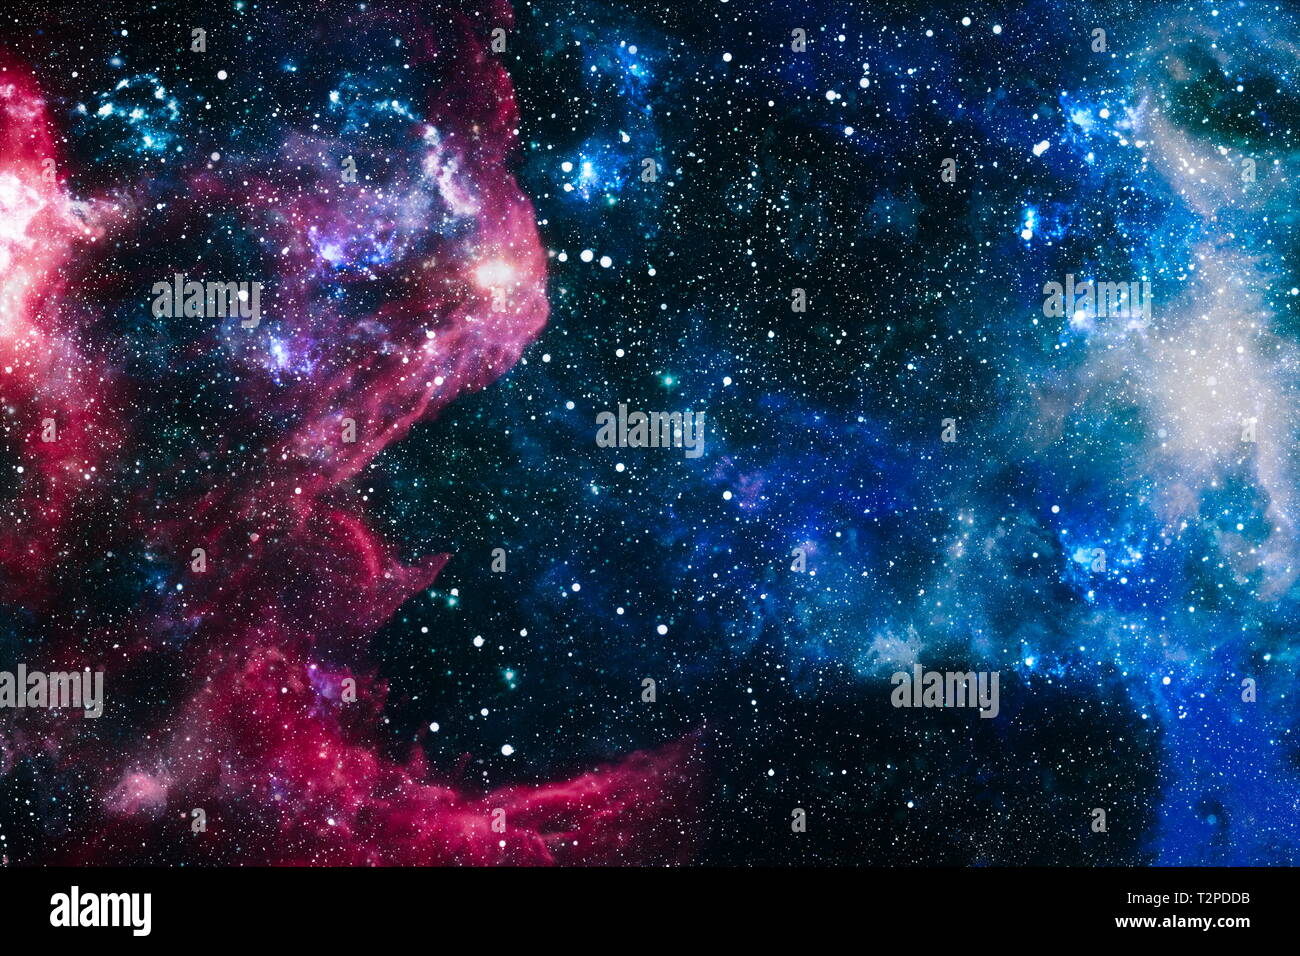 High quality space background. Elements of this image furnished by NASA. Stock Photo